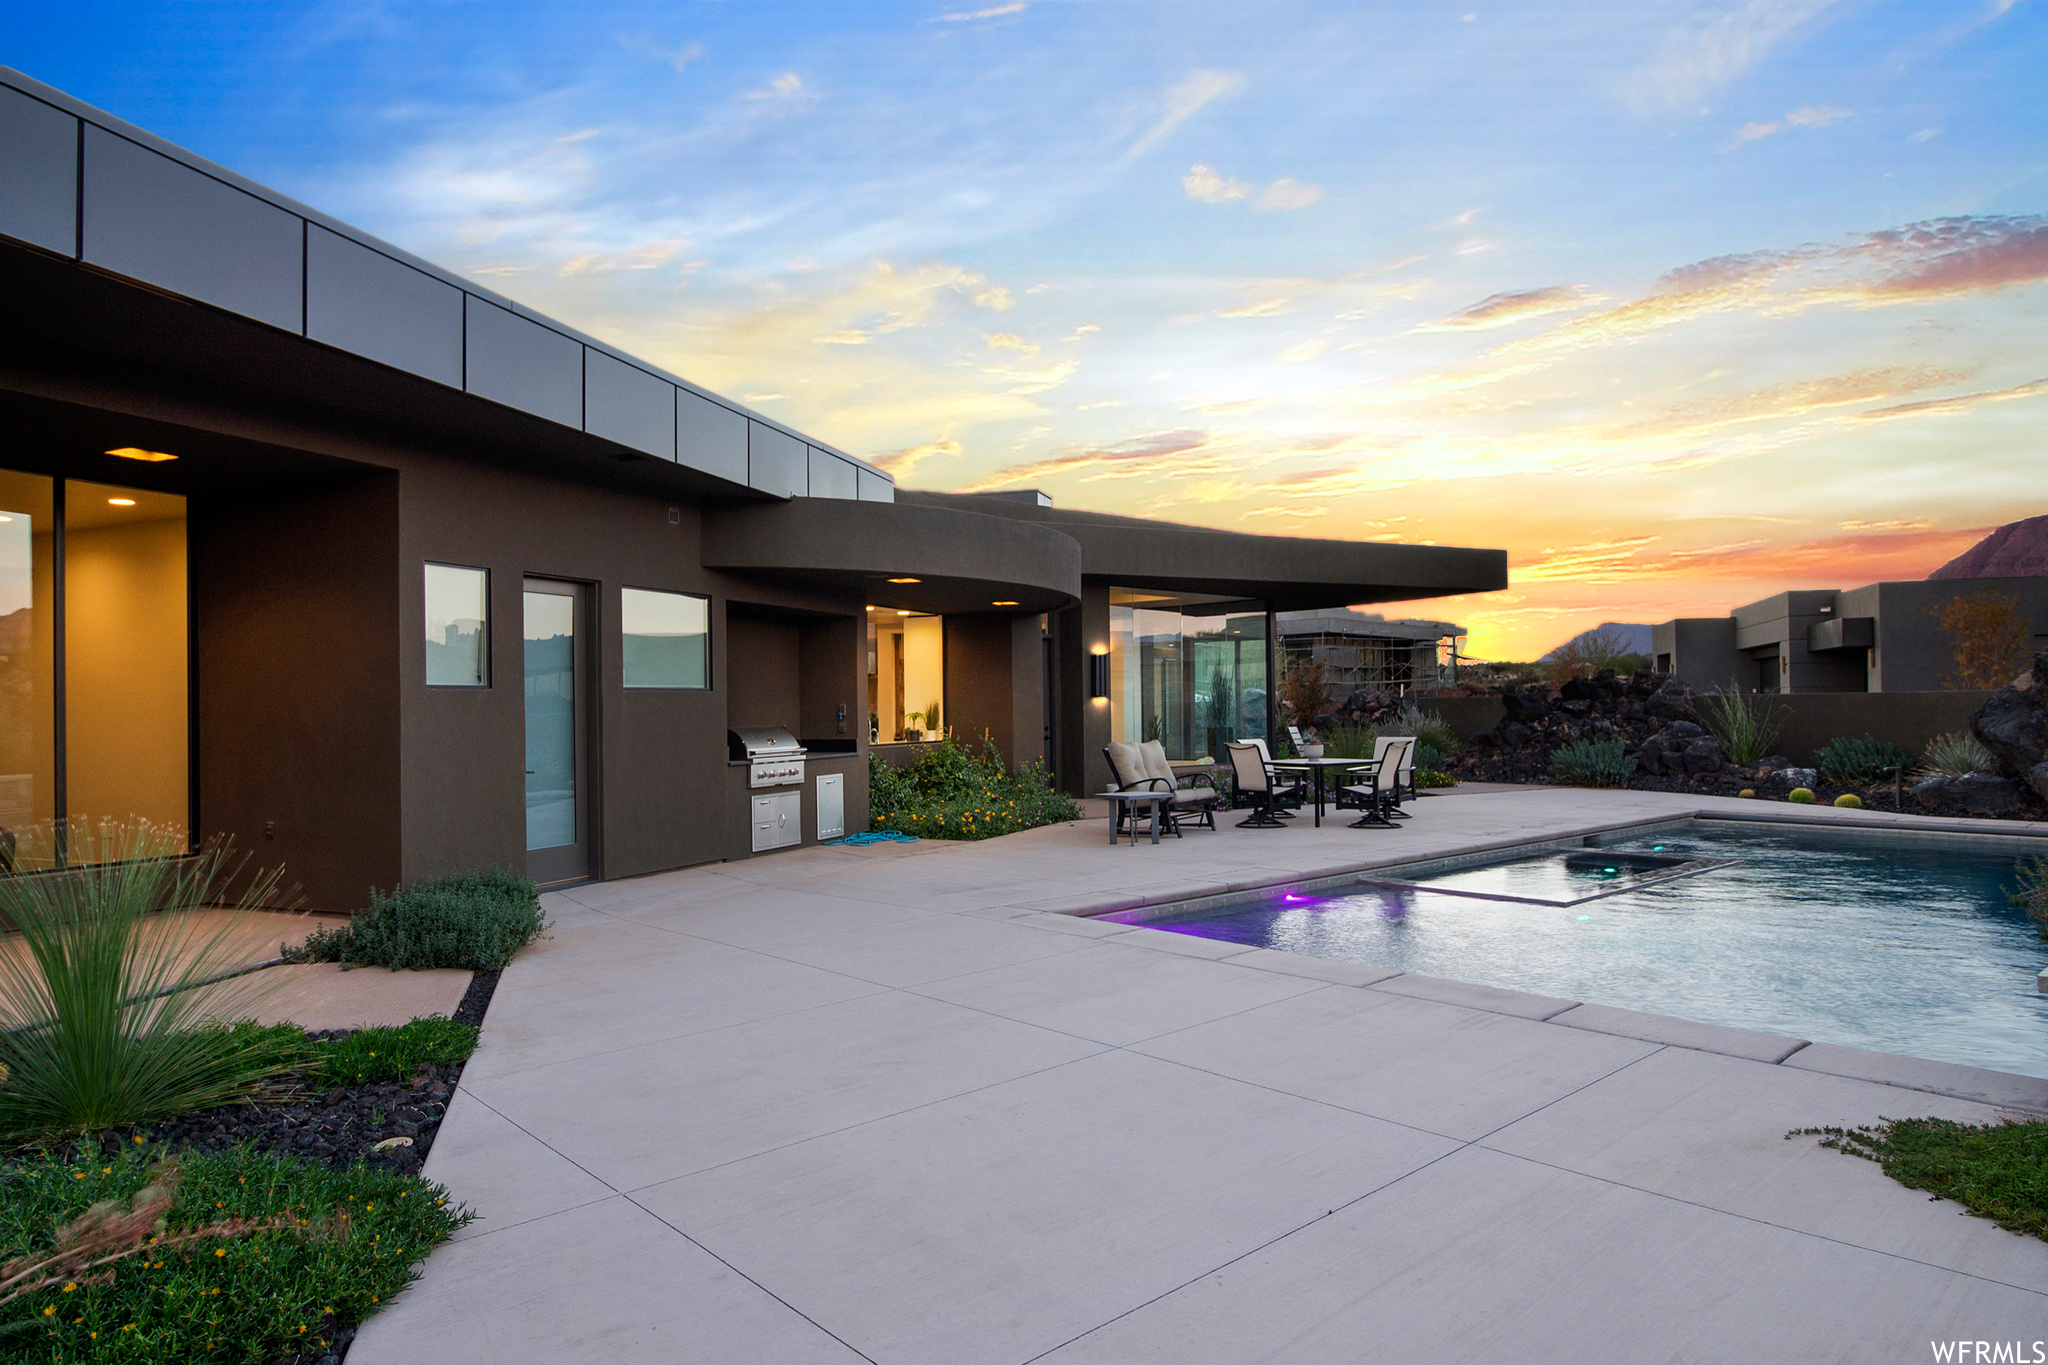 Pool at dusk featuring a patio, exterior kitchen, and a grill